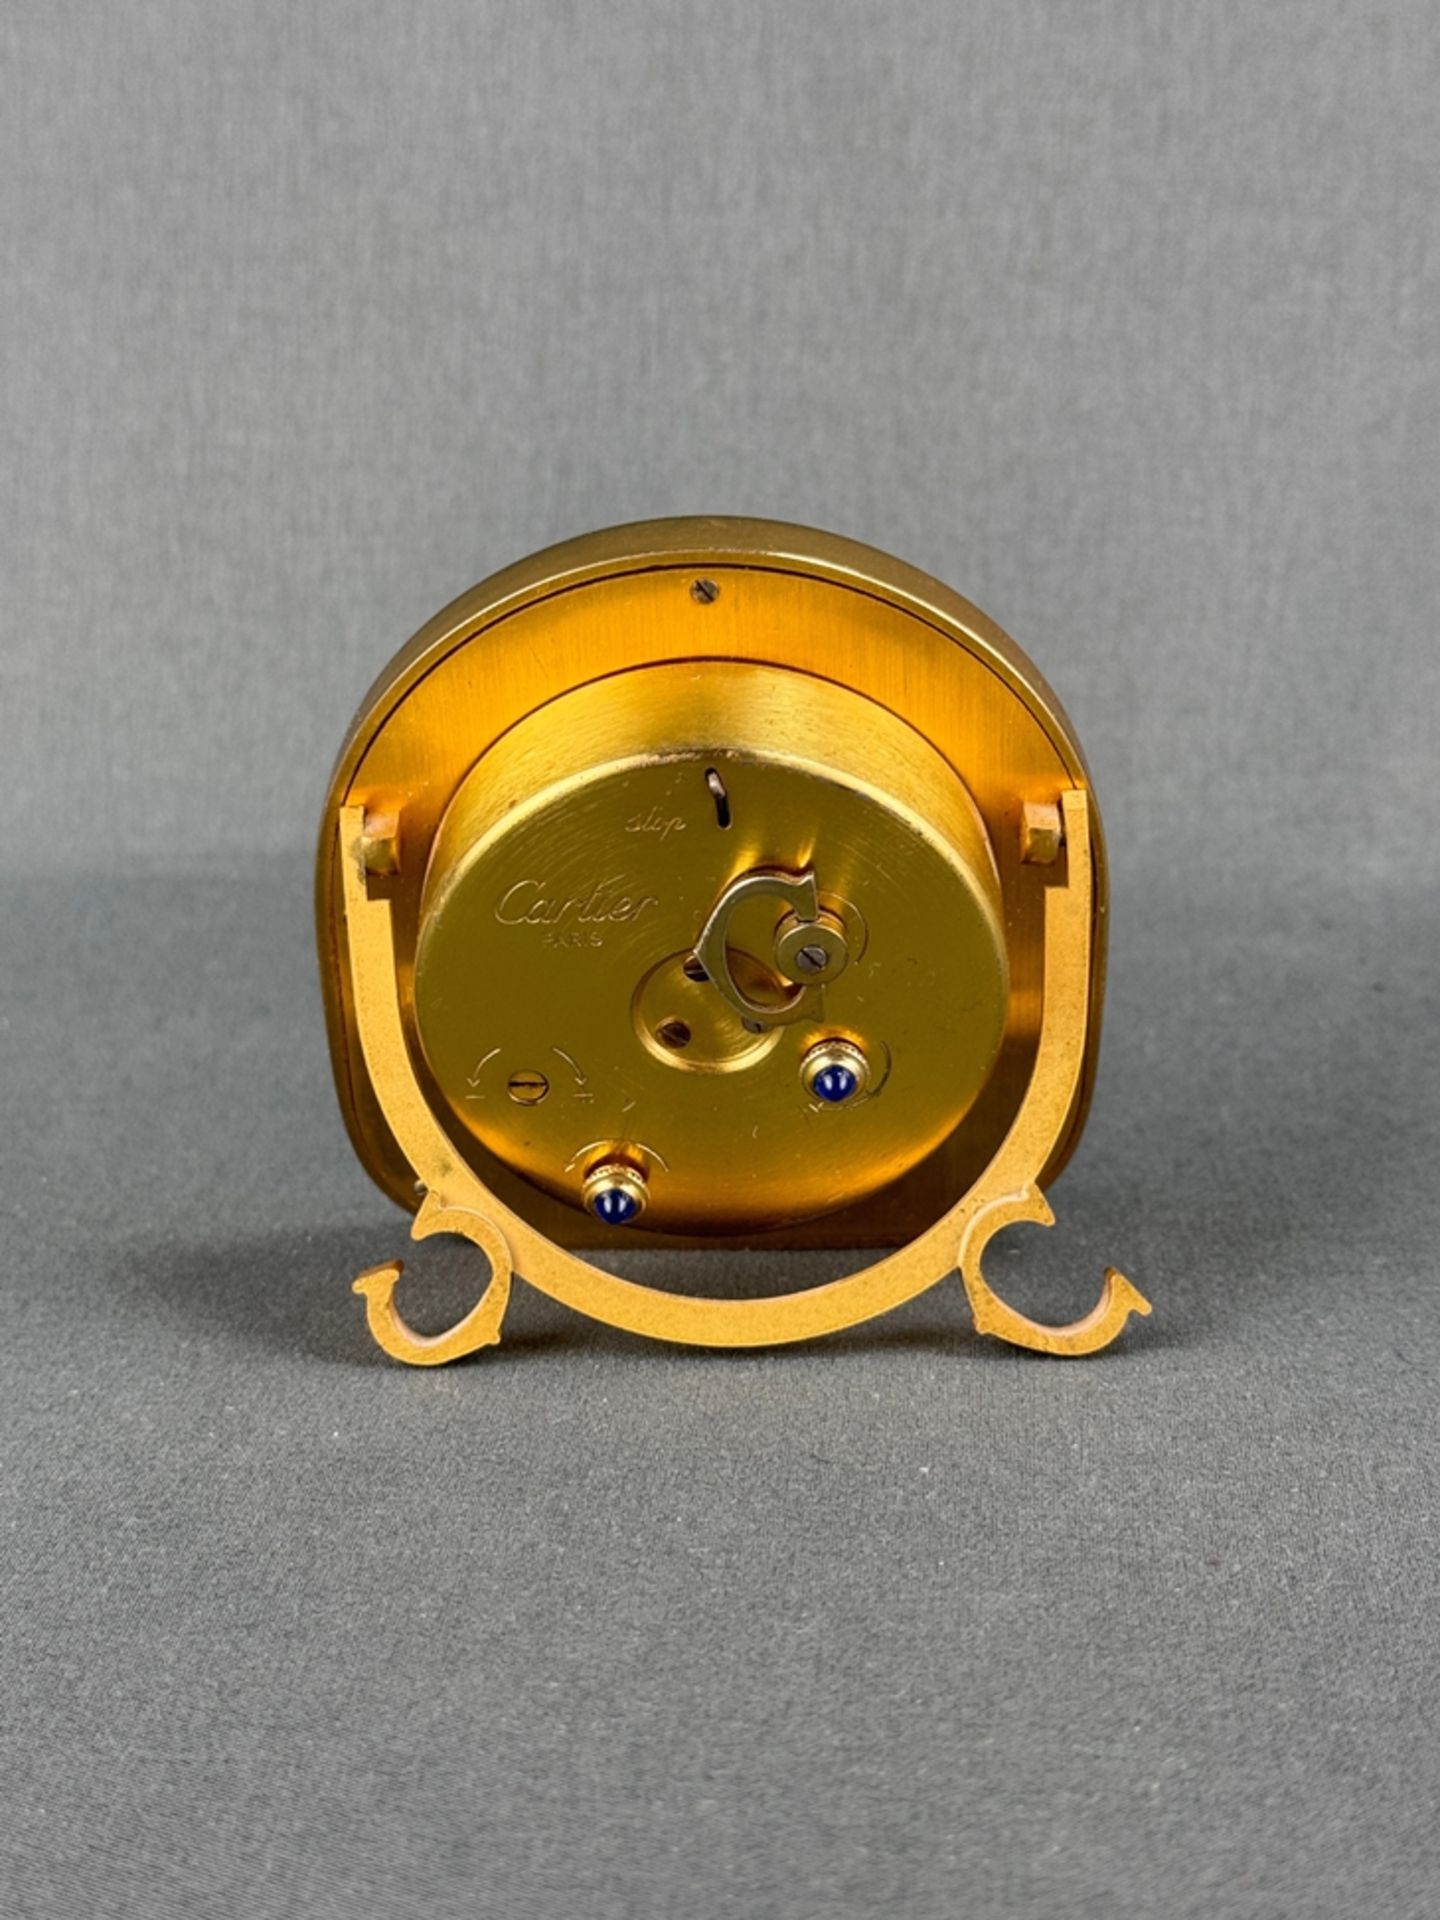 Table clock with alarm function, Cartier, Swiss made, brass case, manual winding, front and verso m - Image 2 of 2